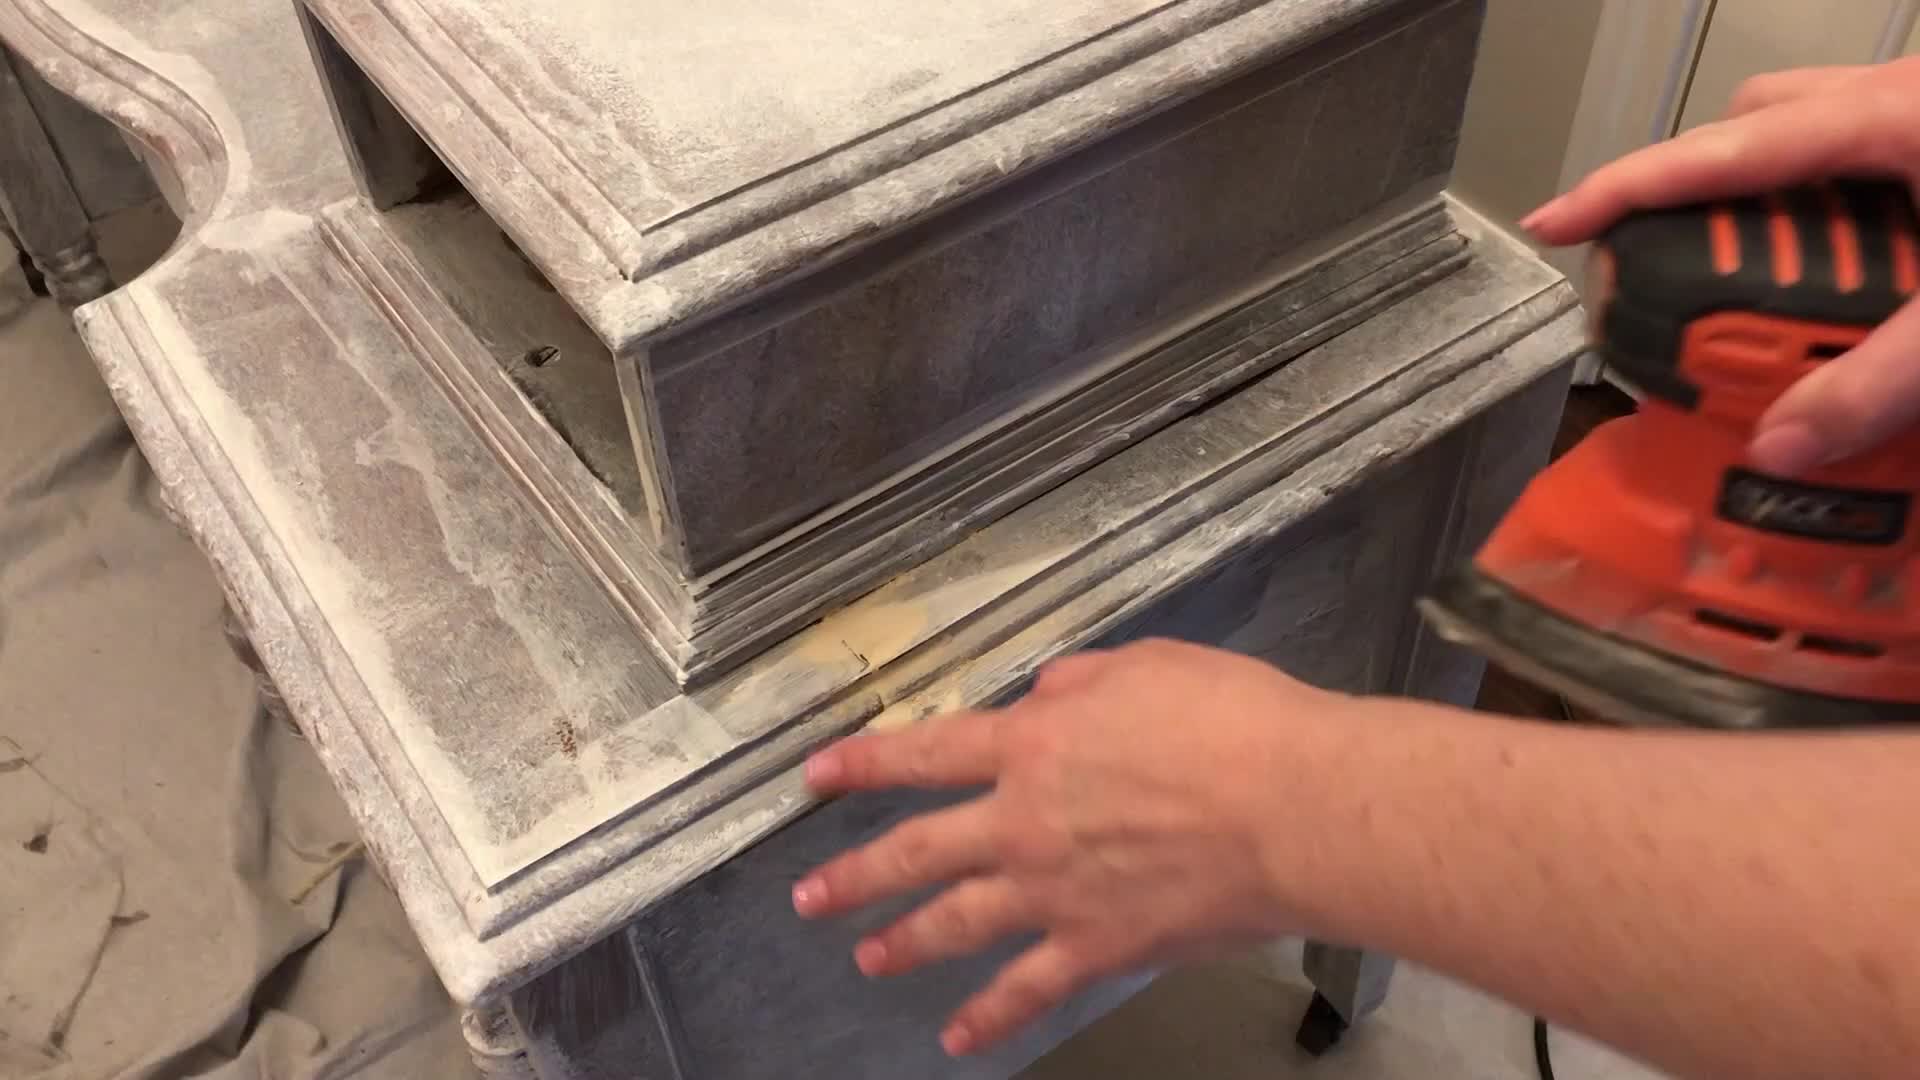 How To Paint Furniture Without Chalk Paint 